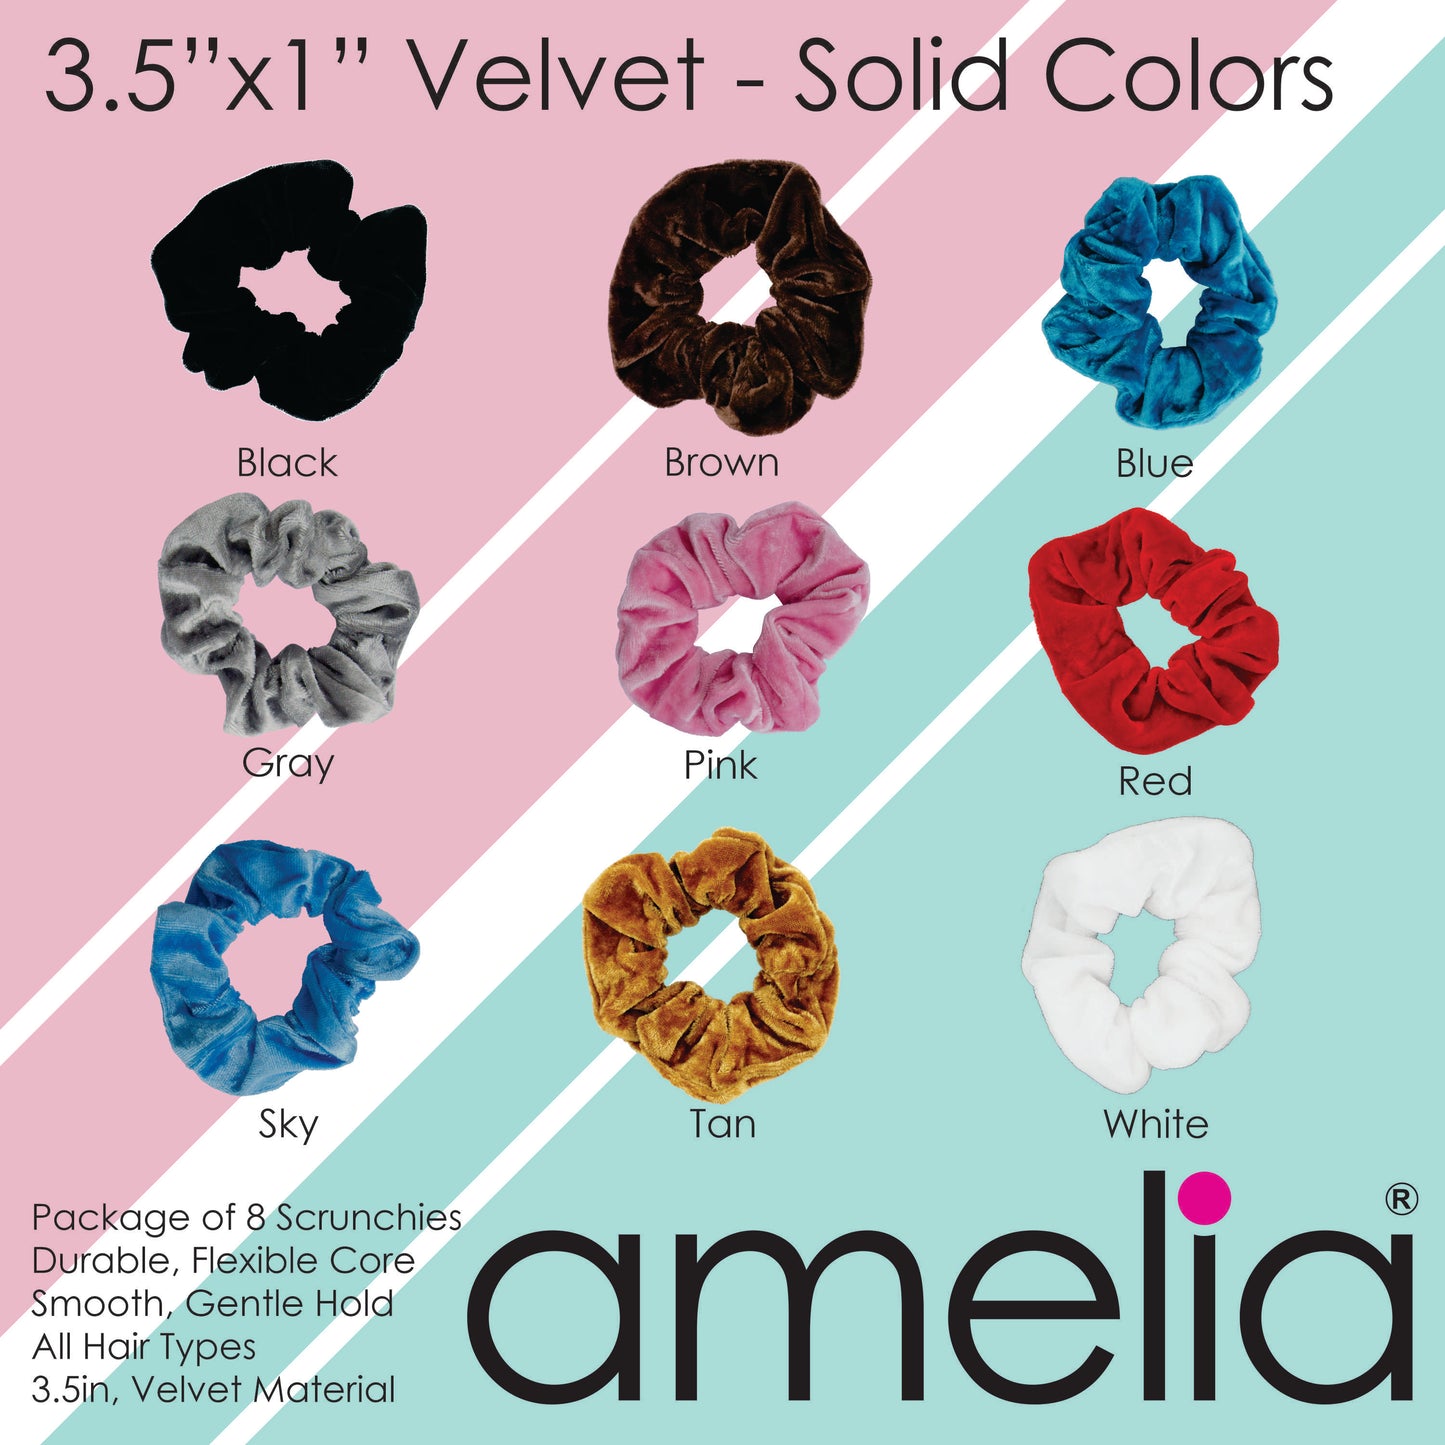 Amelia Beauty, Pink Velvet Scrunchies, 3.5in Diameter, Gentle on Hair, Strong Hold, No Snag, No Dents or Creases. 8 Pack